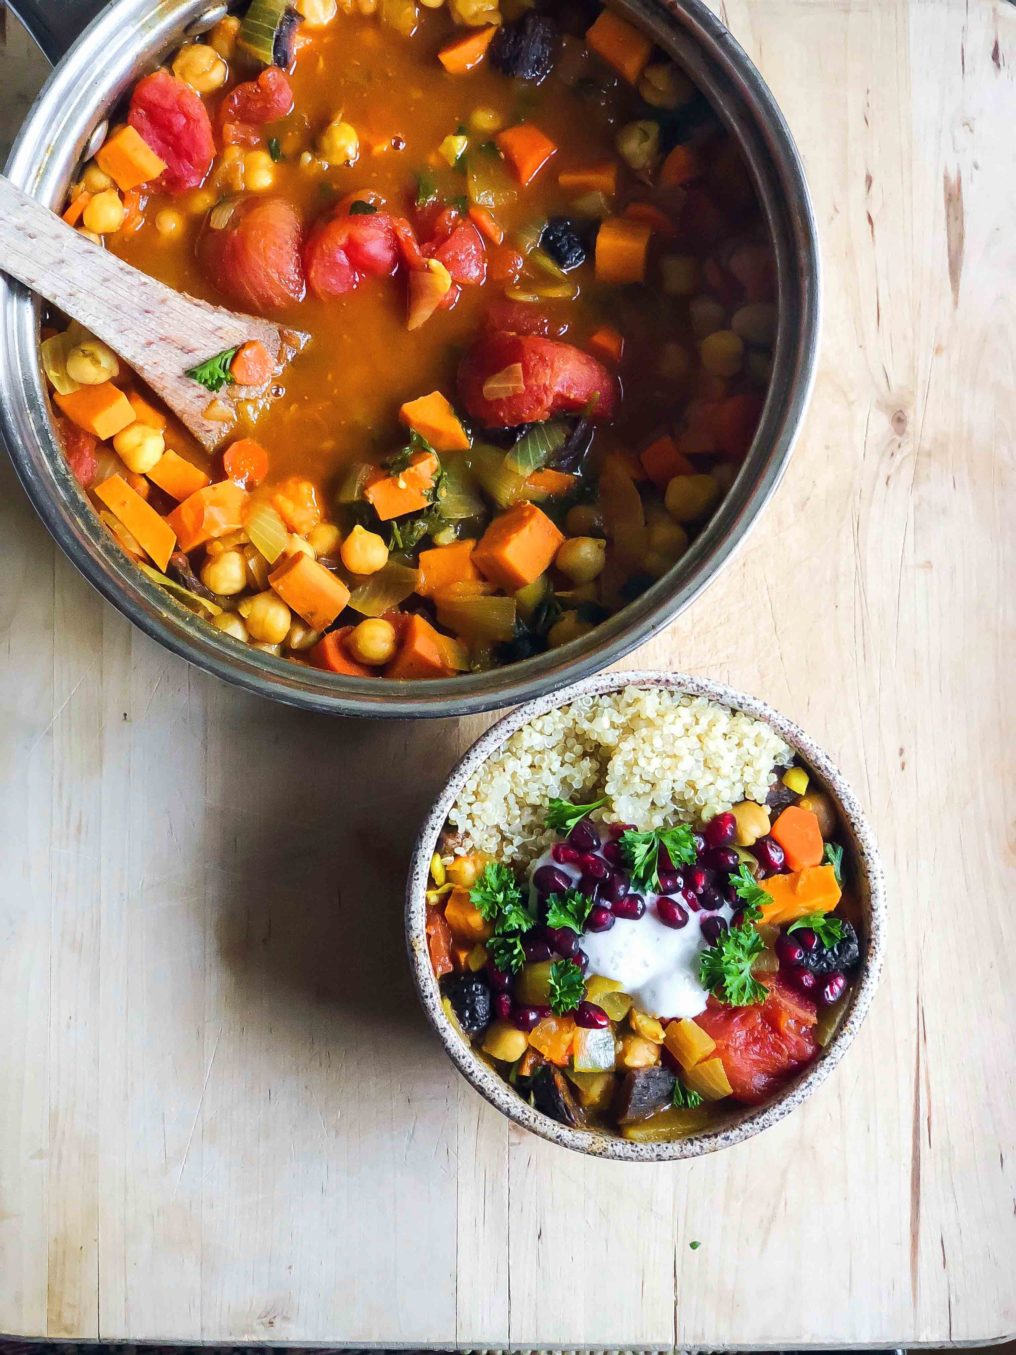 Warm up with vegetable tagine served over quinoa. Inspired by Moroccan vegetable tagine, this vegetarian dish is great with couscous too.